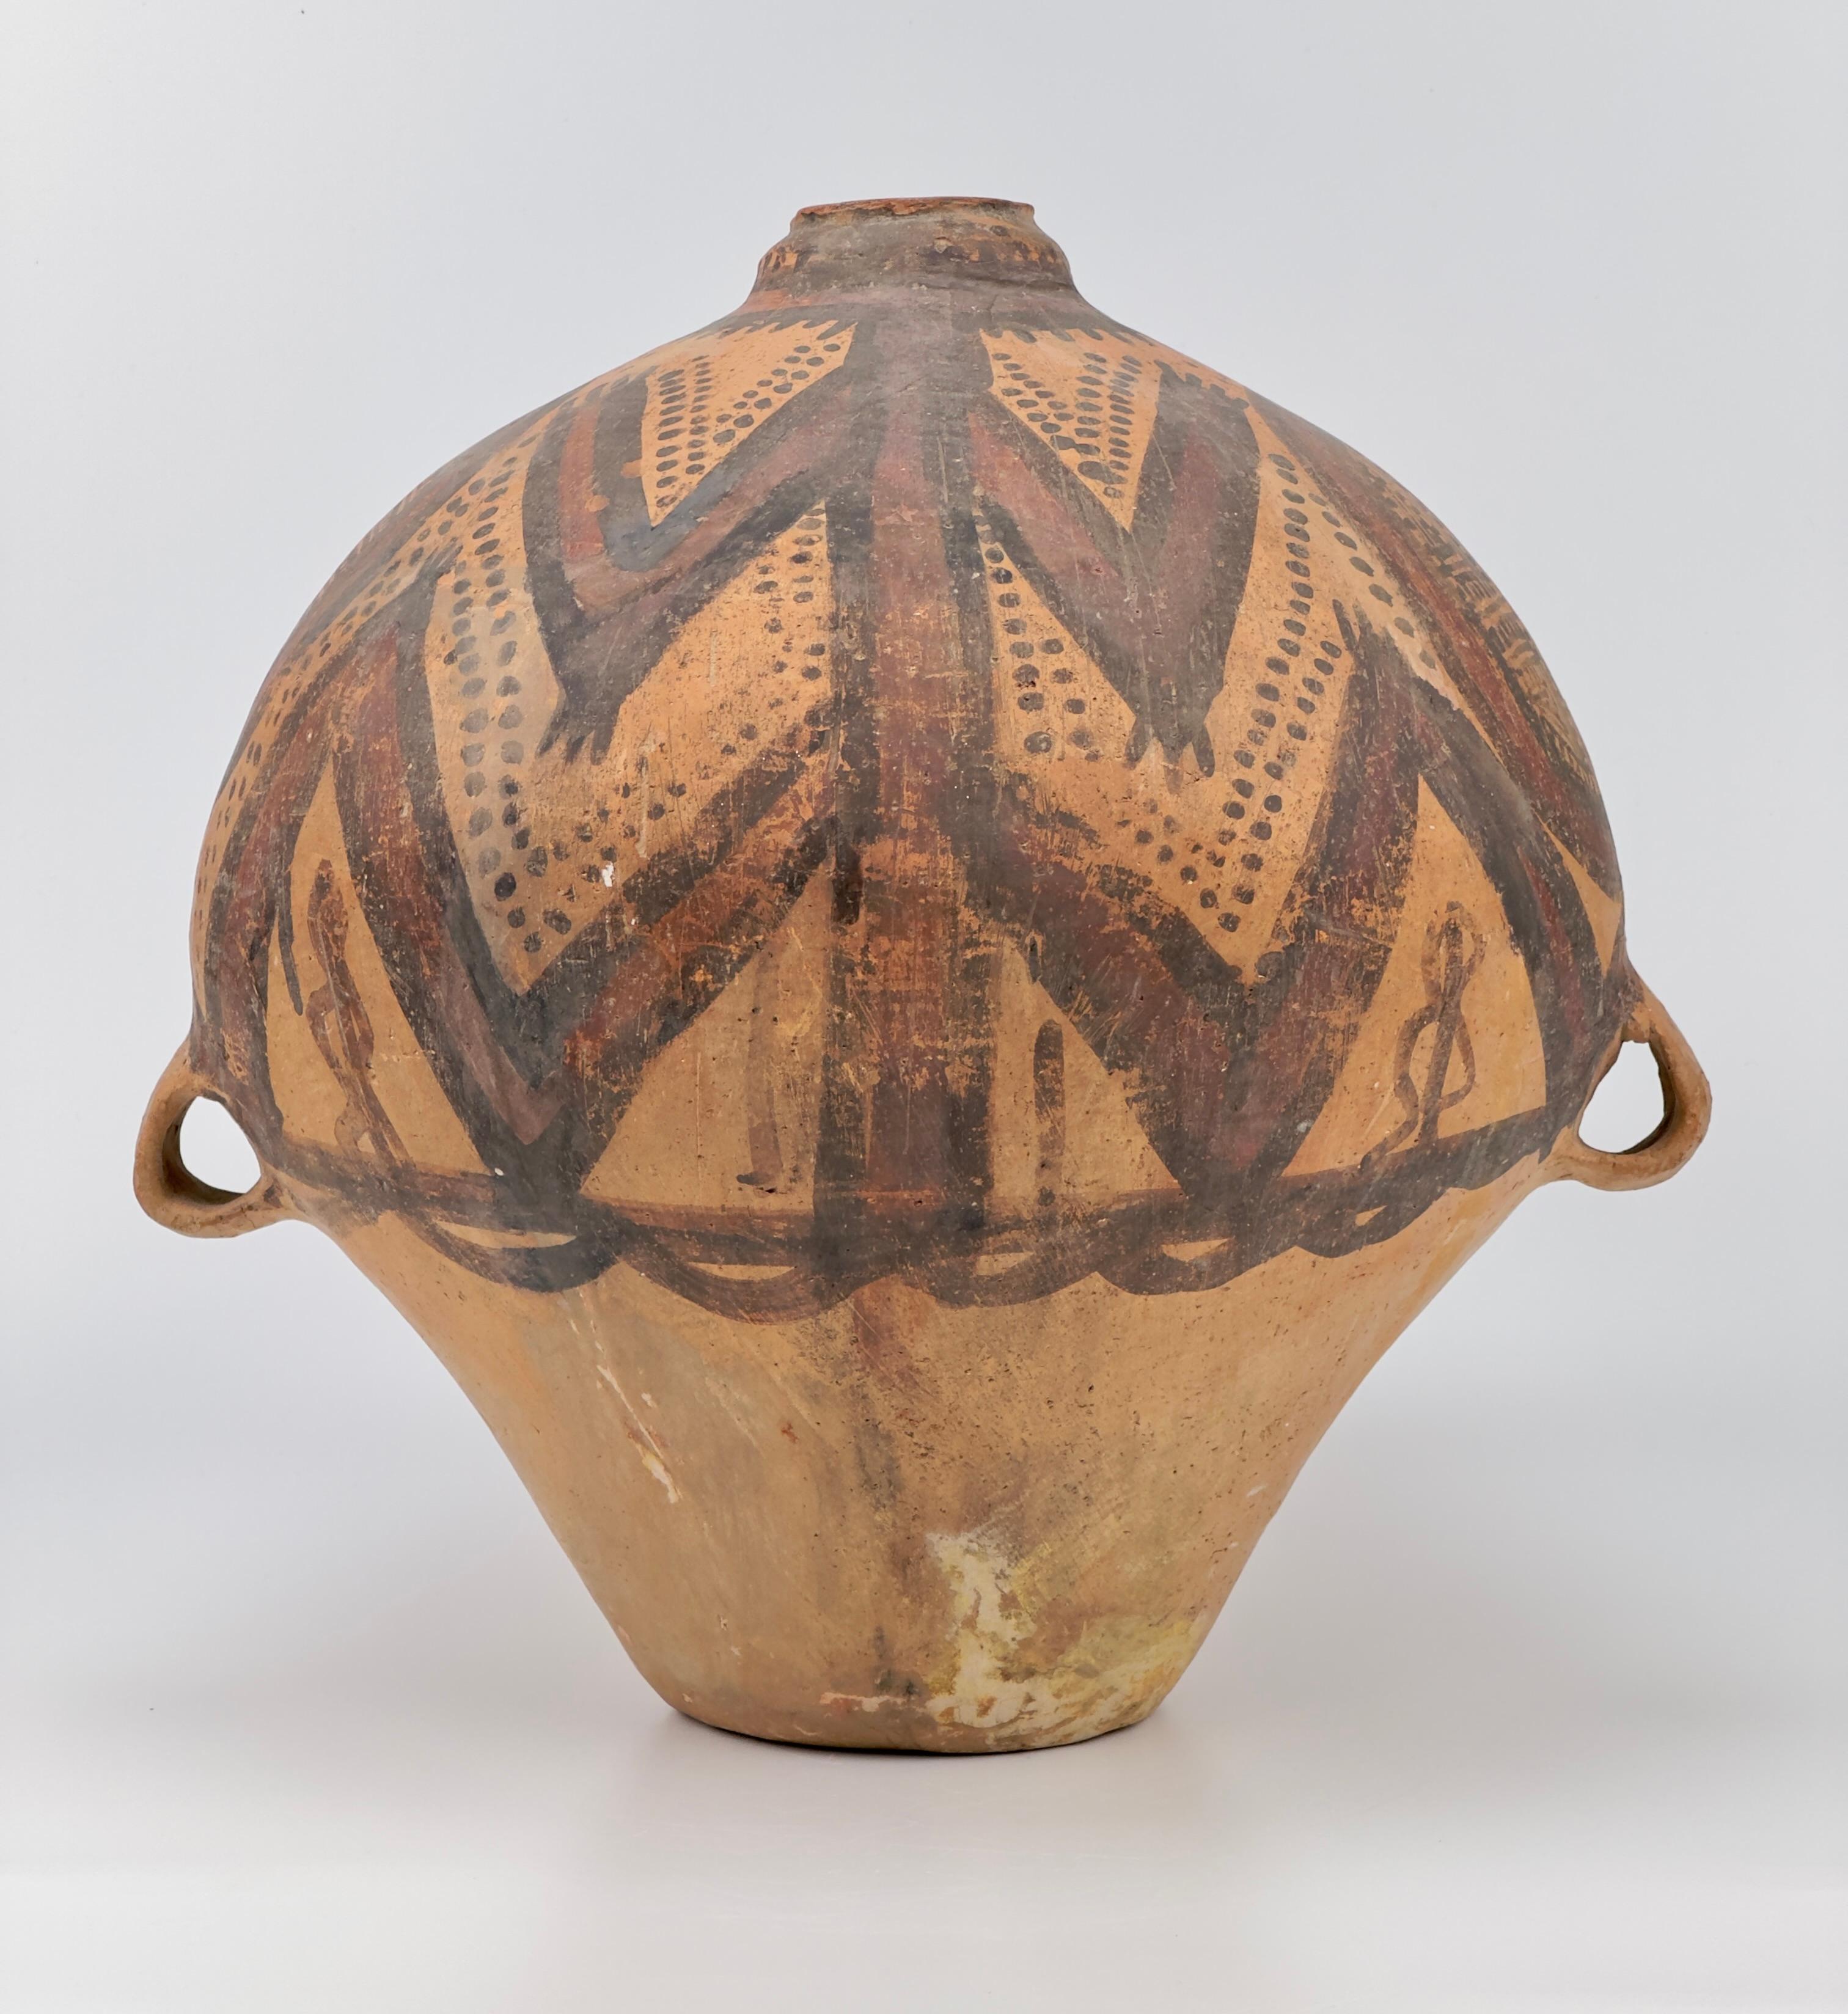 Large and small two-handled jars, pitchers, bowls, and beakers are the most common forms produced during the Machang phase of the Majiayao (or Gansu Yangshao) culture. The decorative motifs on Machang-period wares are primarily geometric, featuring